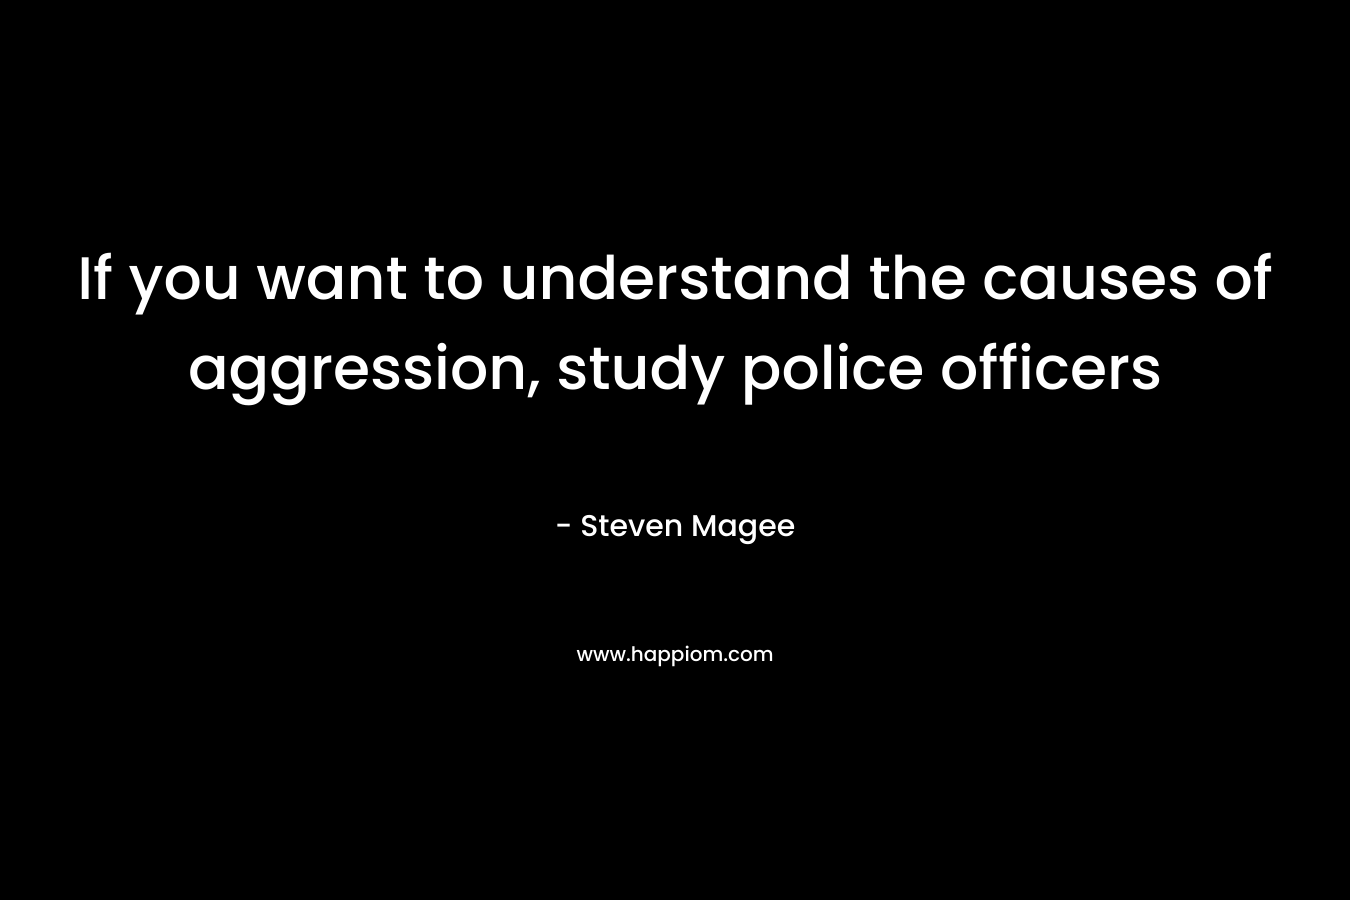 If you want to understand the causes of aggression, study police officers